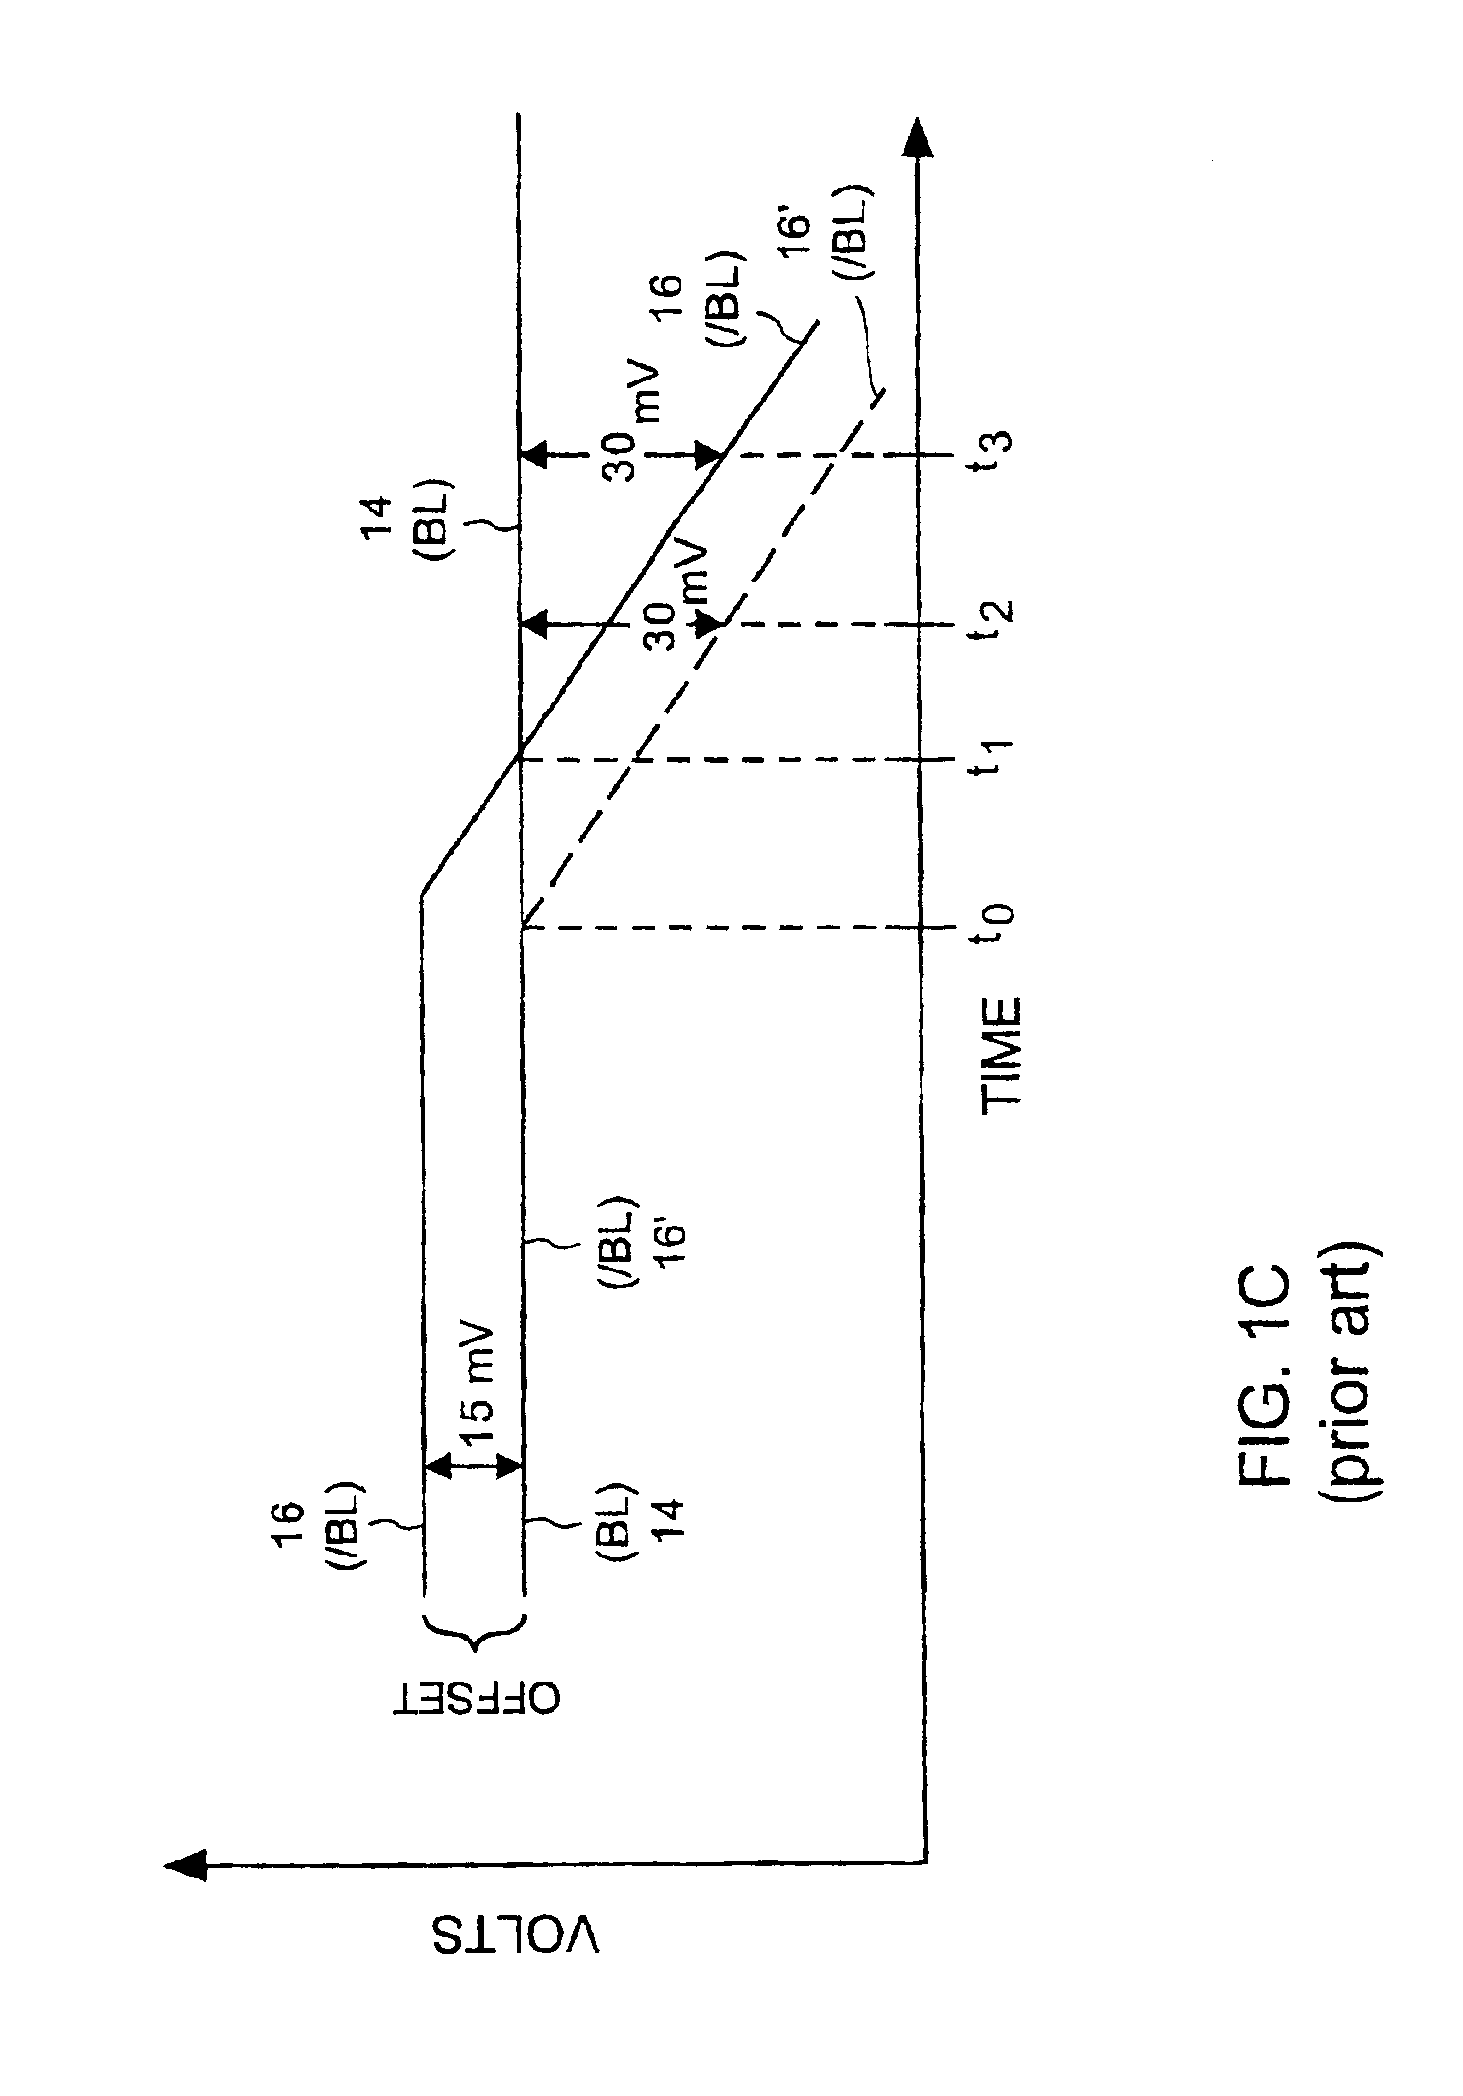 Methods for reducing bitline voltage offsets in memory devices